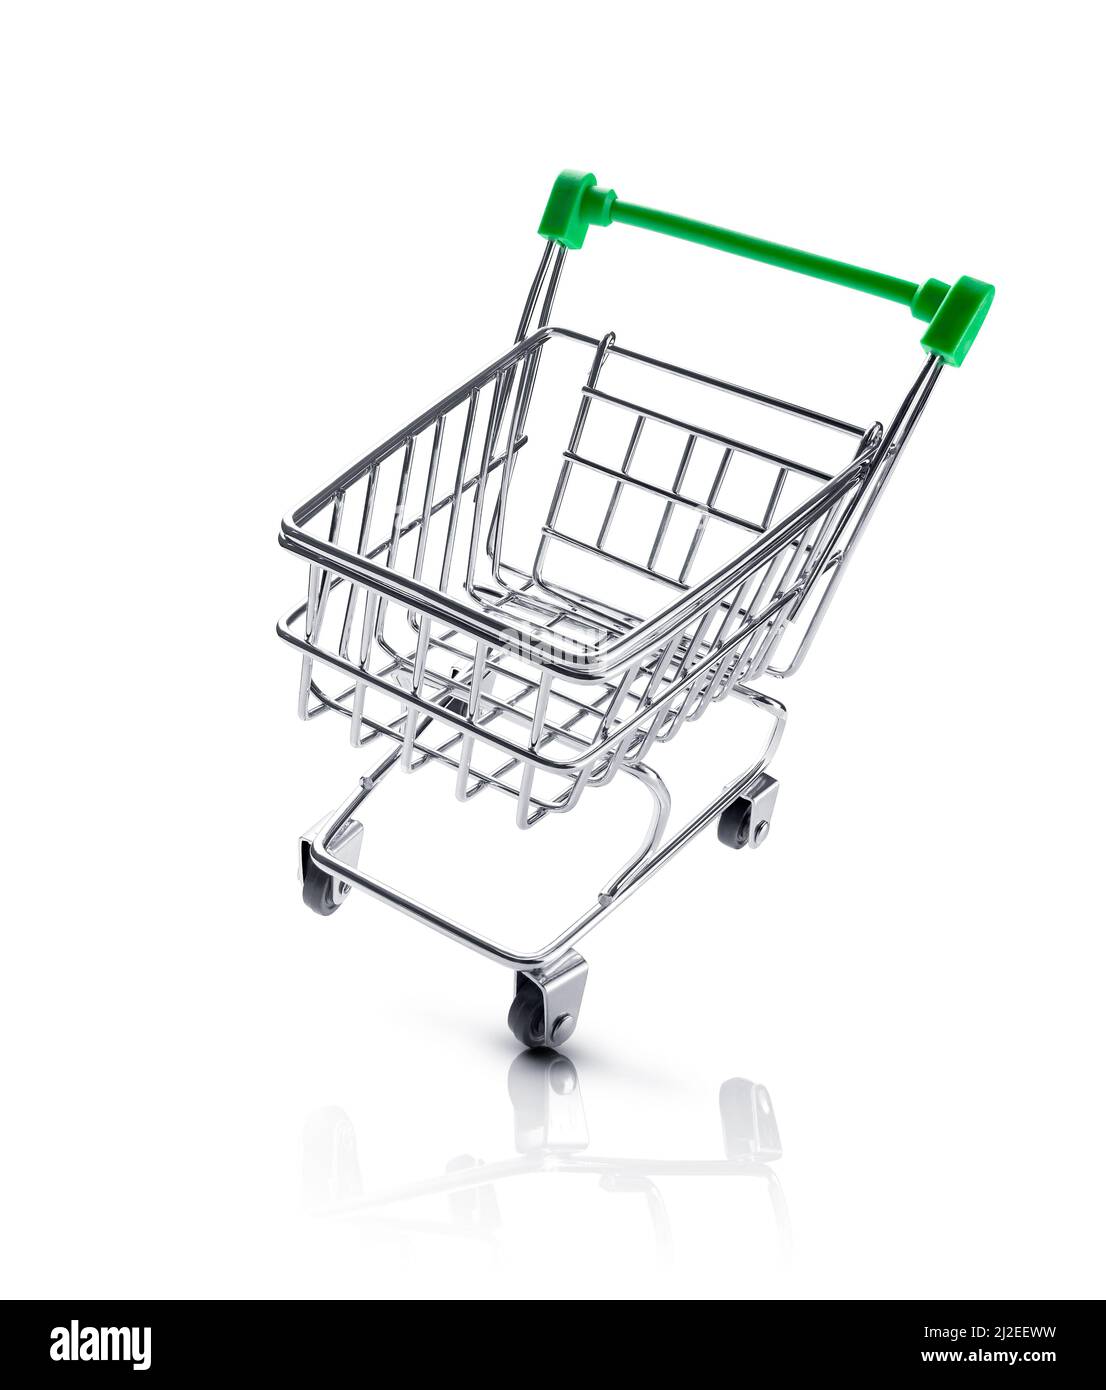 An empty shopping trolley with a green handle isolated on white Stock Photo